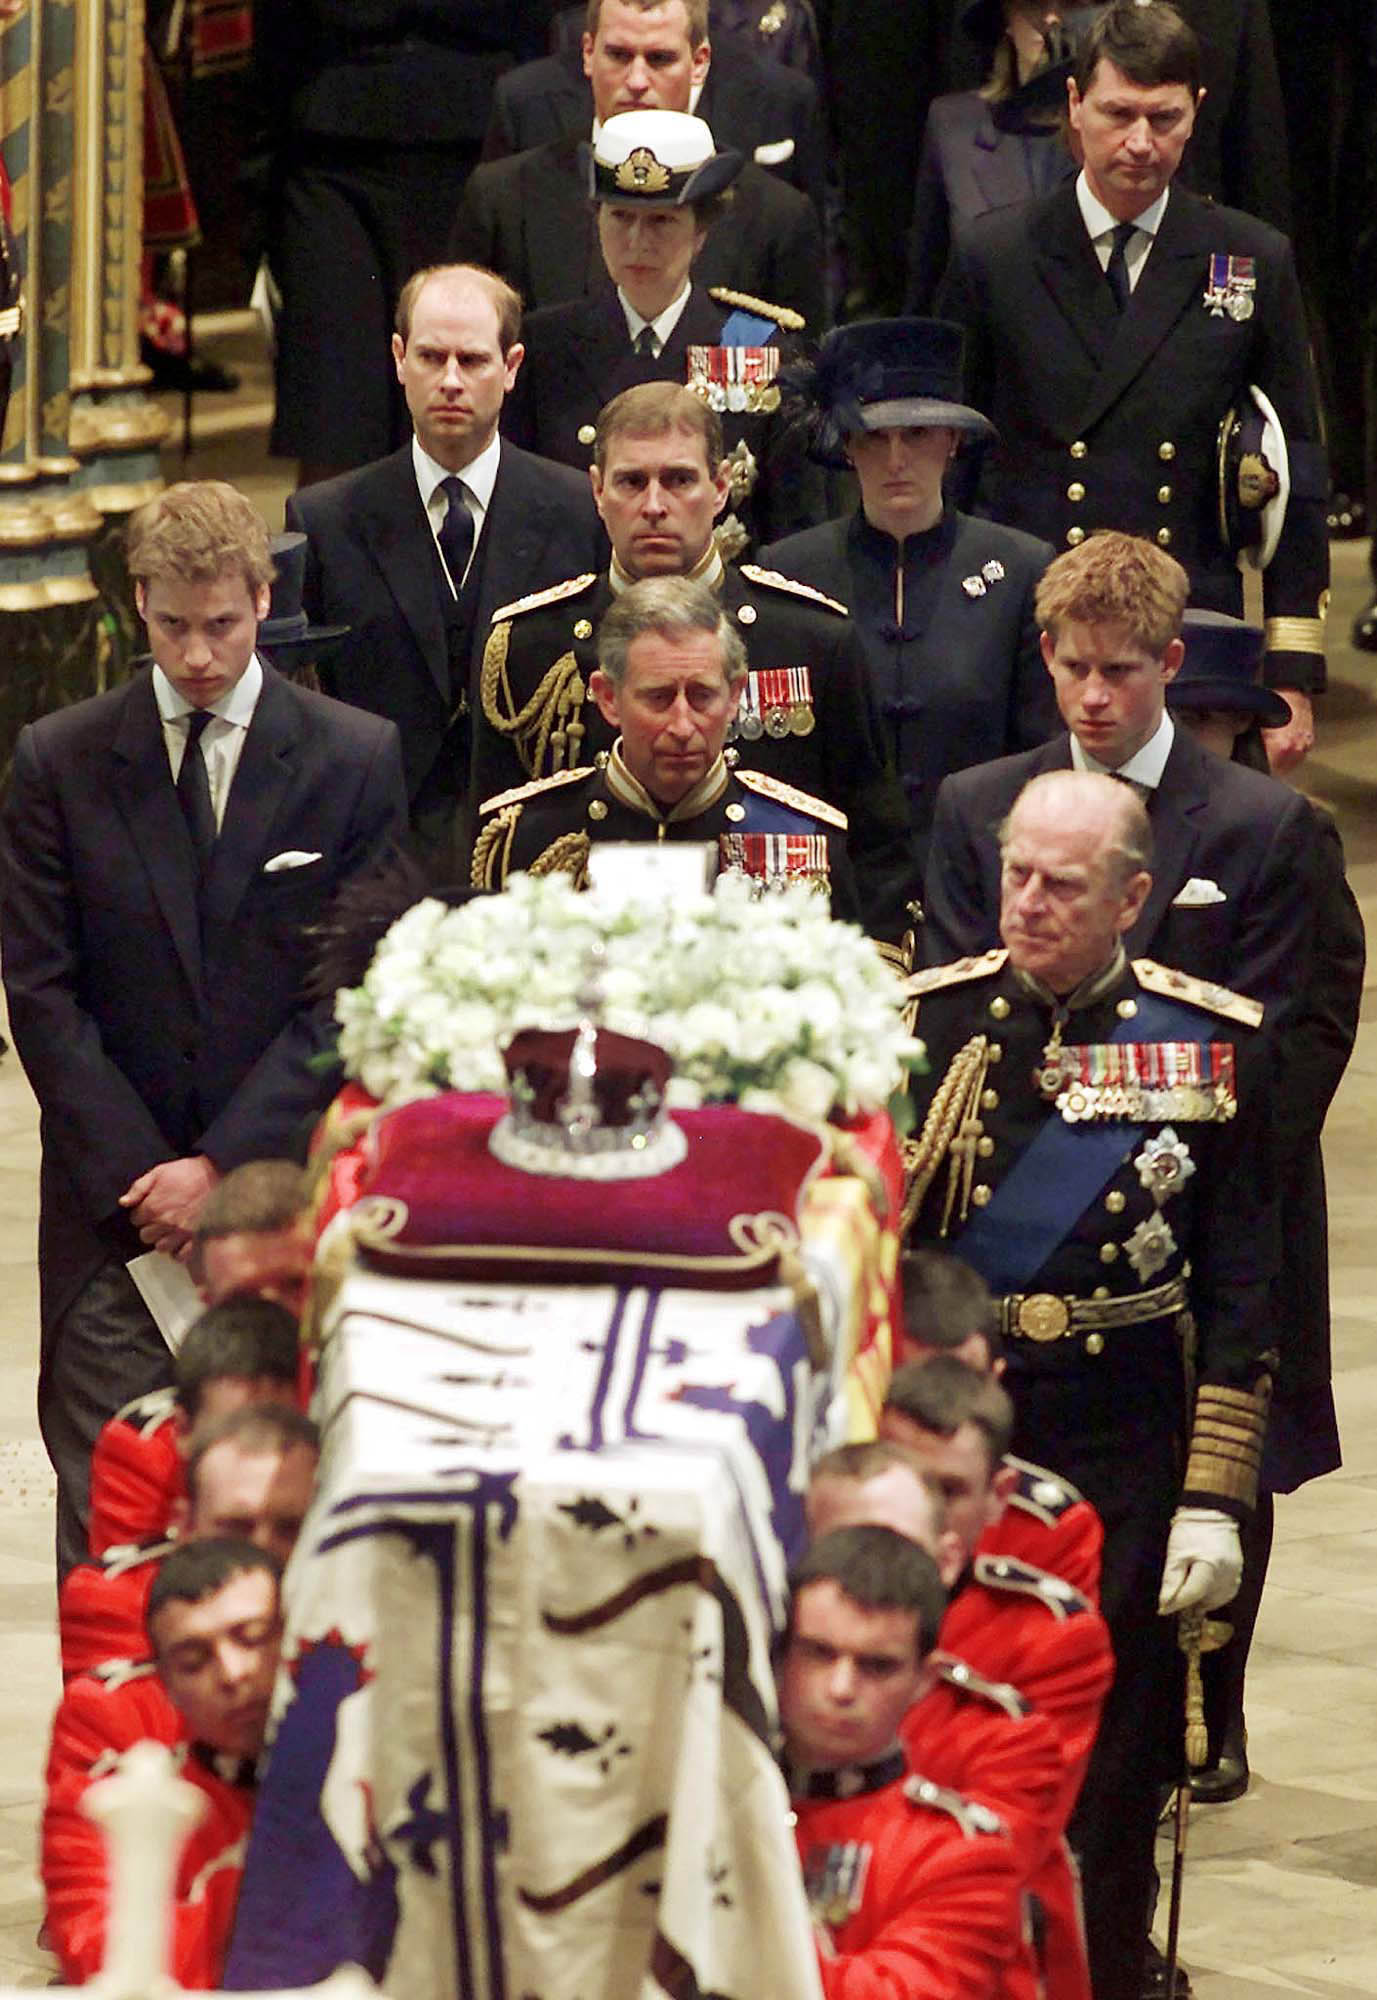 <p>Members of Britain's royal family -- Prince William, Prince Charles (now King Charles III), Prince Harry, Prince Philip, Prince Edward, Prince Andrew, Sophie, Countess of Wessex (now Duchess of Edinburgh), Peter Phillips, Princess Anne and her husband, Sir Tim Laurence -- followed the coffin of Queen Elizabeth the Queen Mother out of London's Westminster Abbey at the end of her funeral on April 9, 2002.</p>